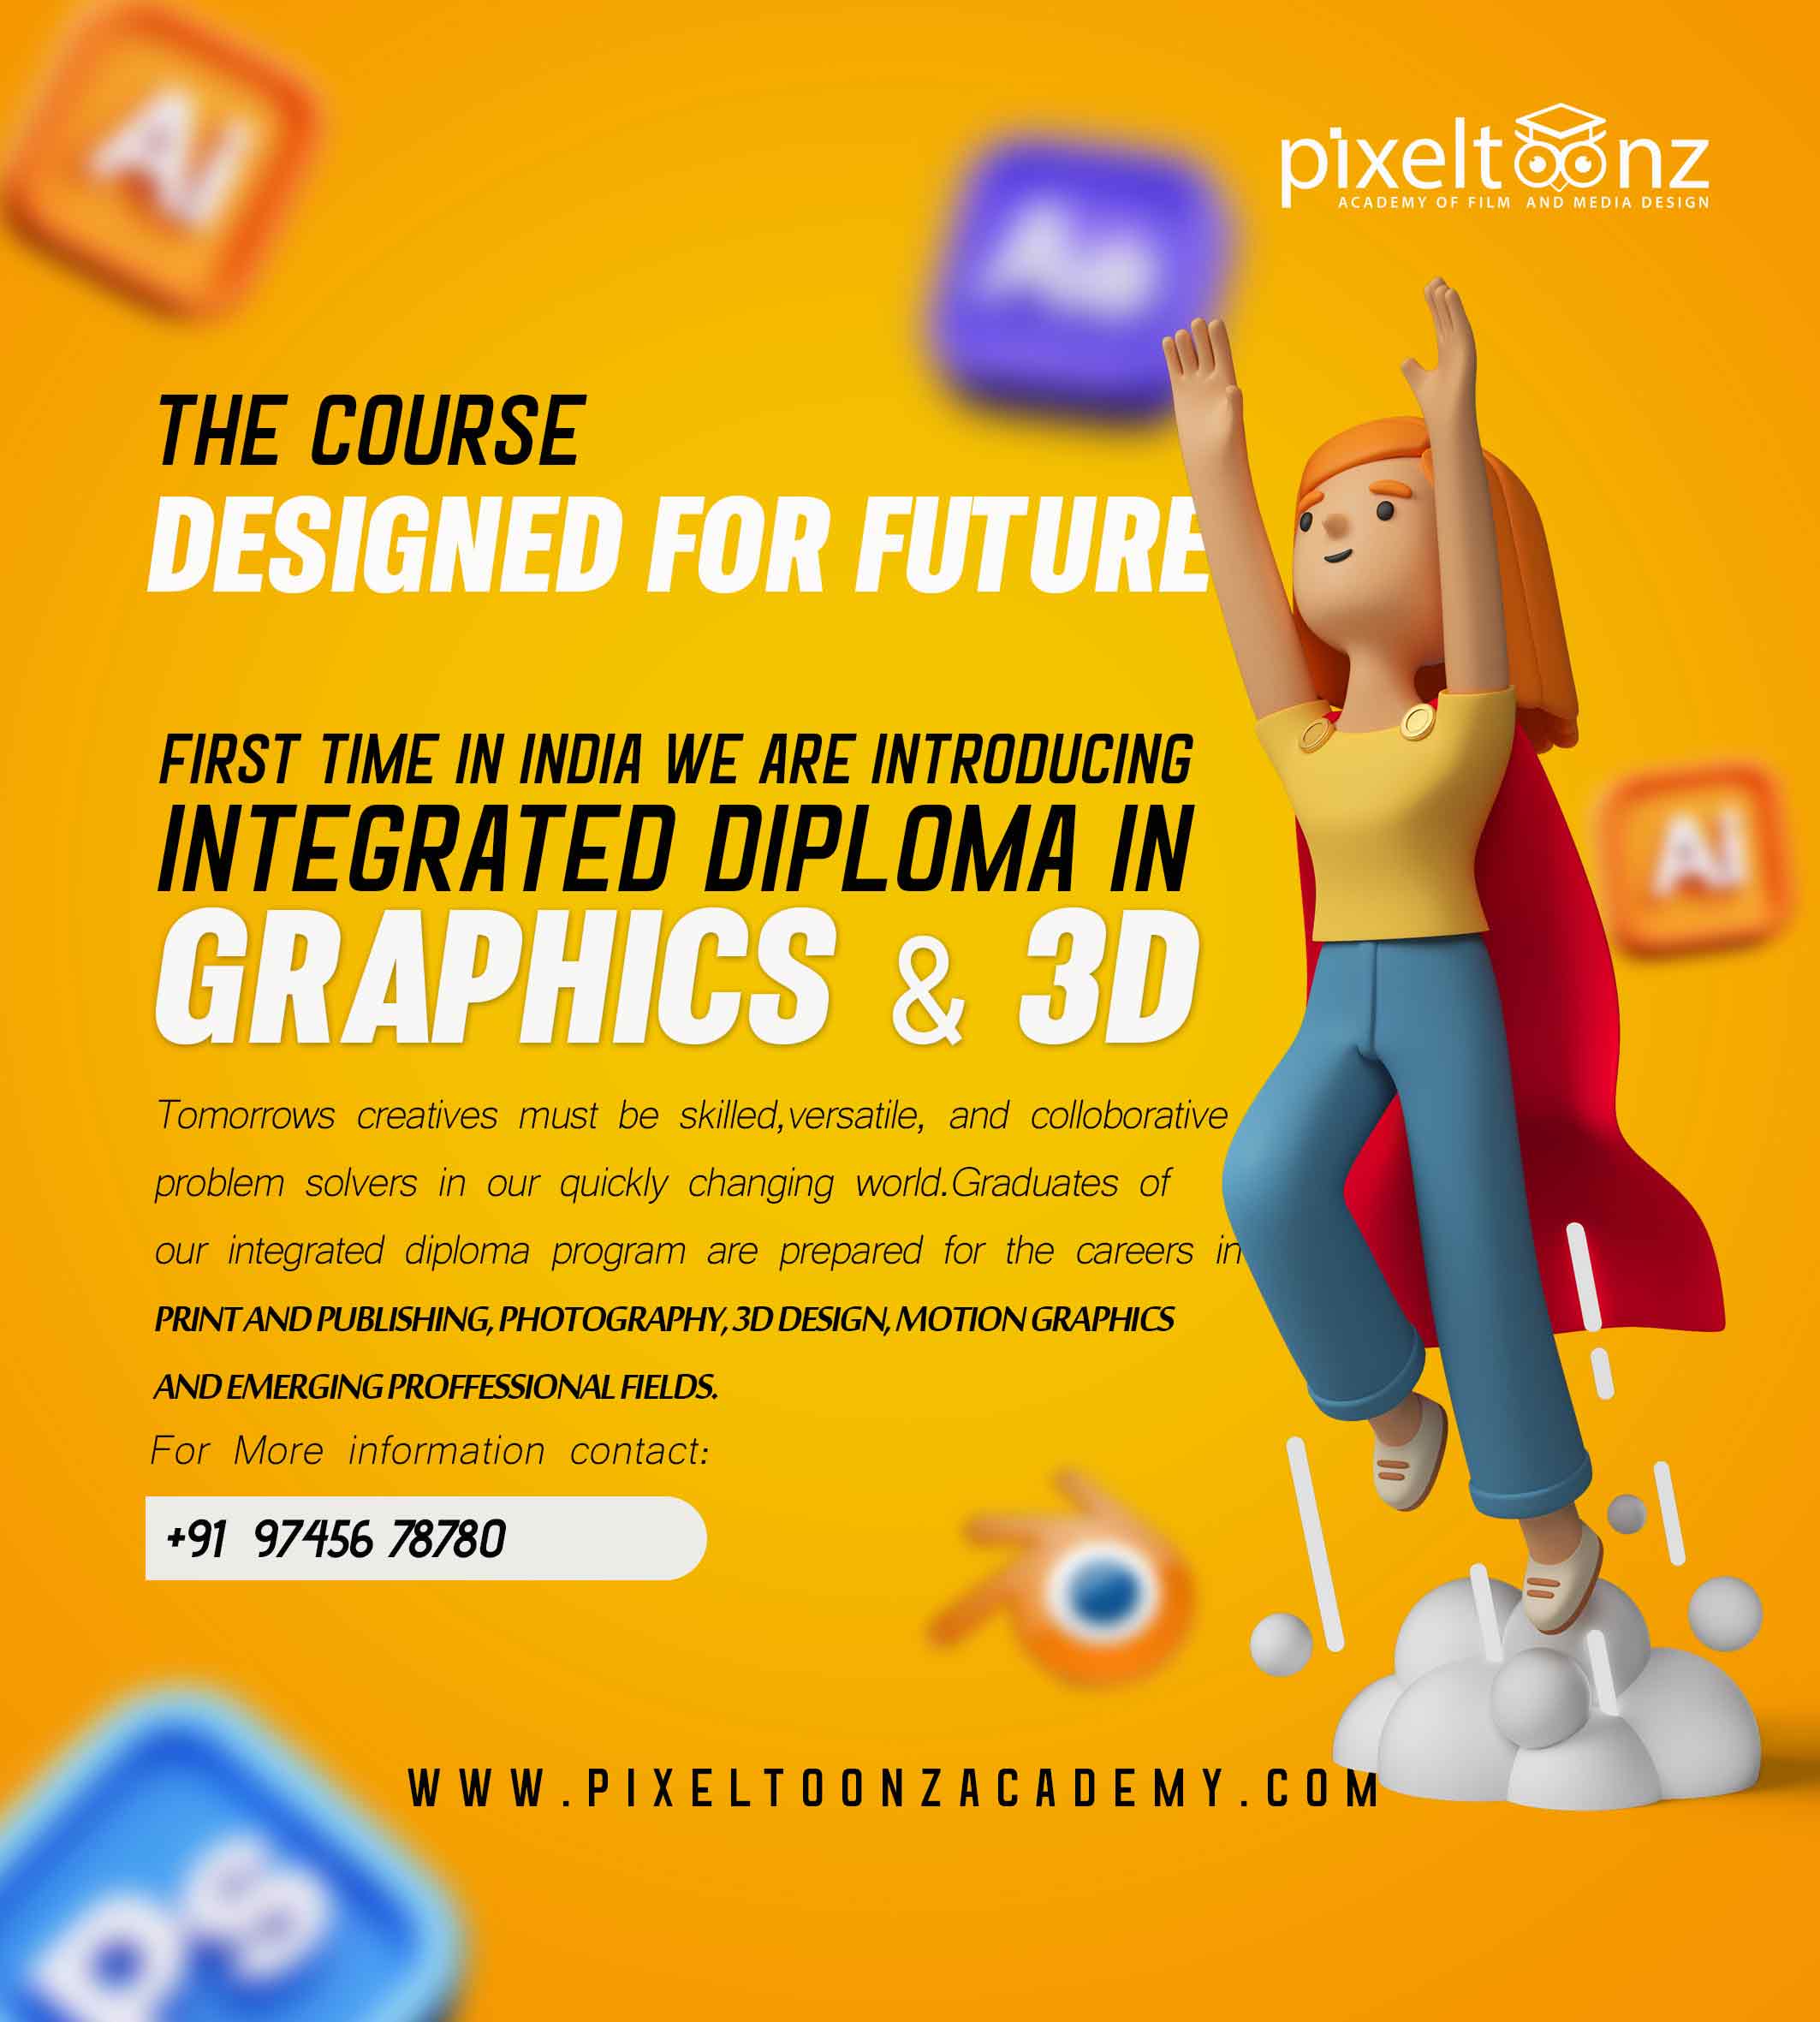 Integrated Diploma In Graphics & 3D